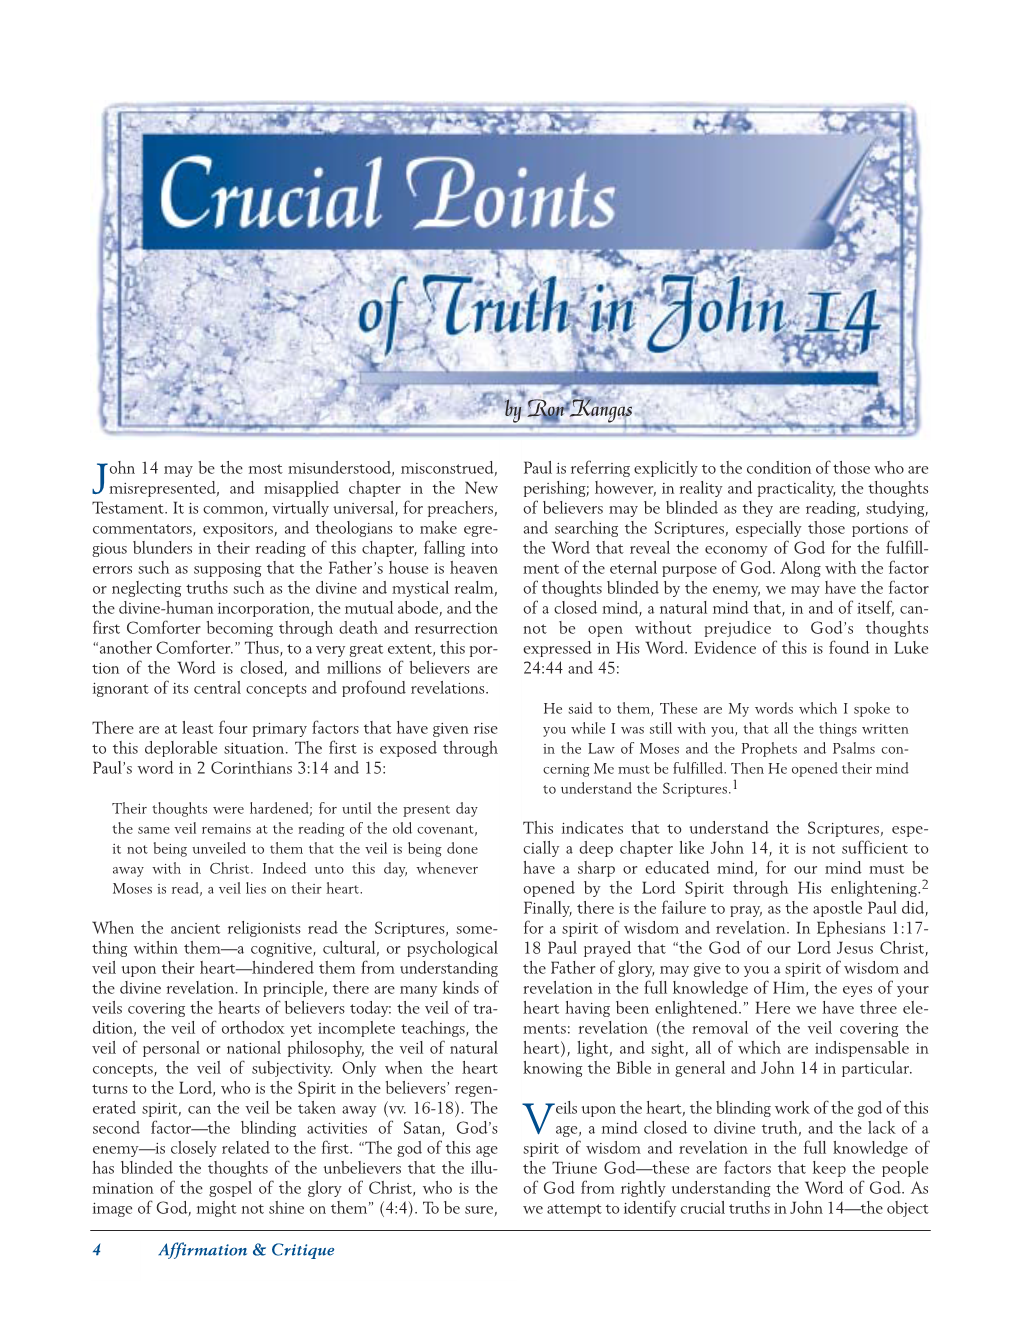 Crucial Points of Truth in John 14